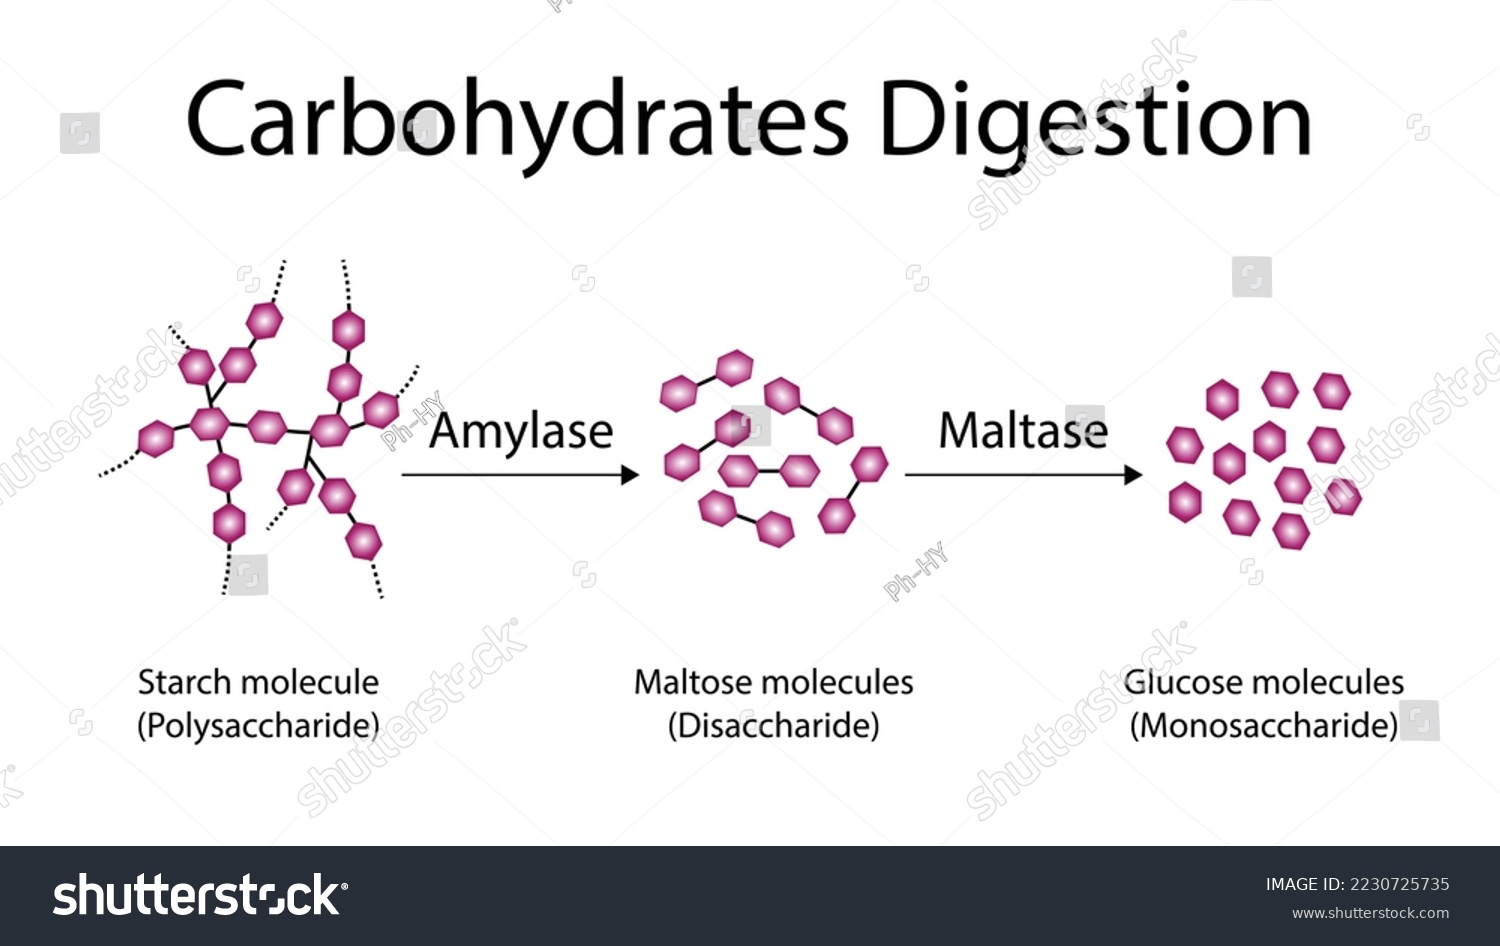 SVG of Carbohydrates Digestion. Amylase   and Maltase Enzymes catalyze Polysaccharide Starch Molecule to Disaccharides and Monosaccharide, glucose Sugar Formation. Scientific Diagram. Vector Illustration. svg